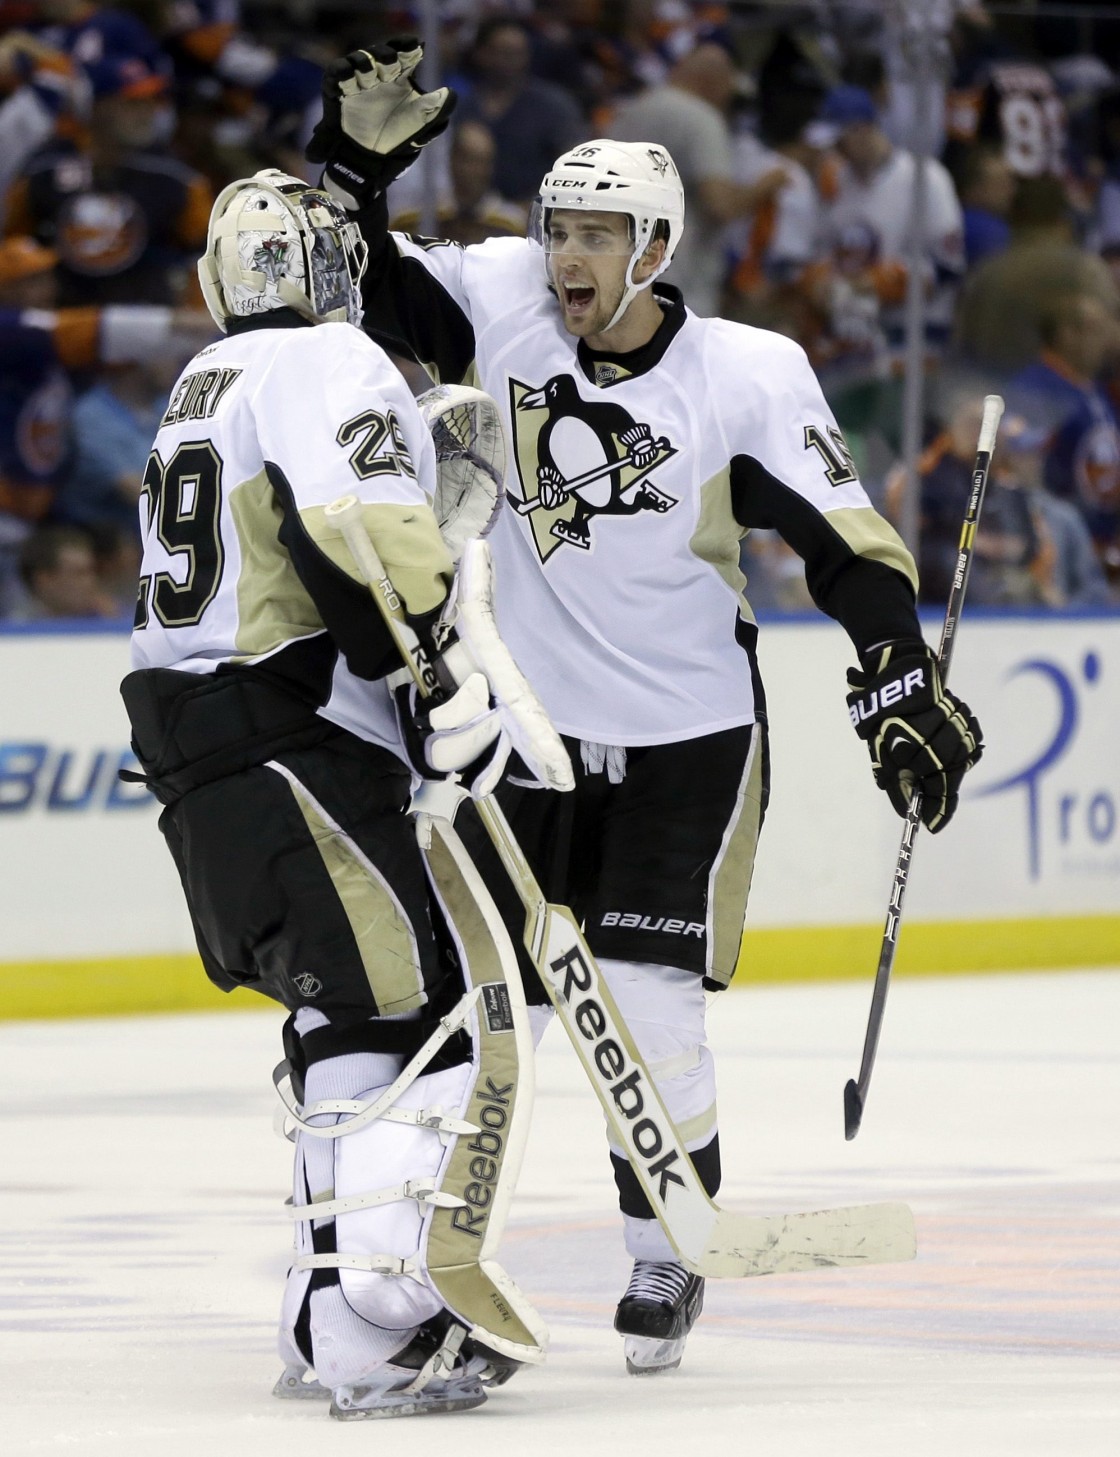 Pittsburgh Penguins' Brandon Sutter, right, and goalie Marc-Andre Fleury celebrate their overtime win against the New York Islanders in Game 3 of an NHL hockey Stanley Cup first-round playoff series on Sunday, May 5, 2013, in Uniondale, N.Y. The Penguins defeated the Islanders 5-4.